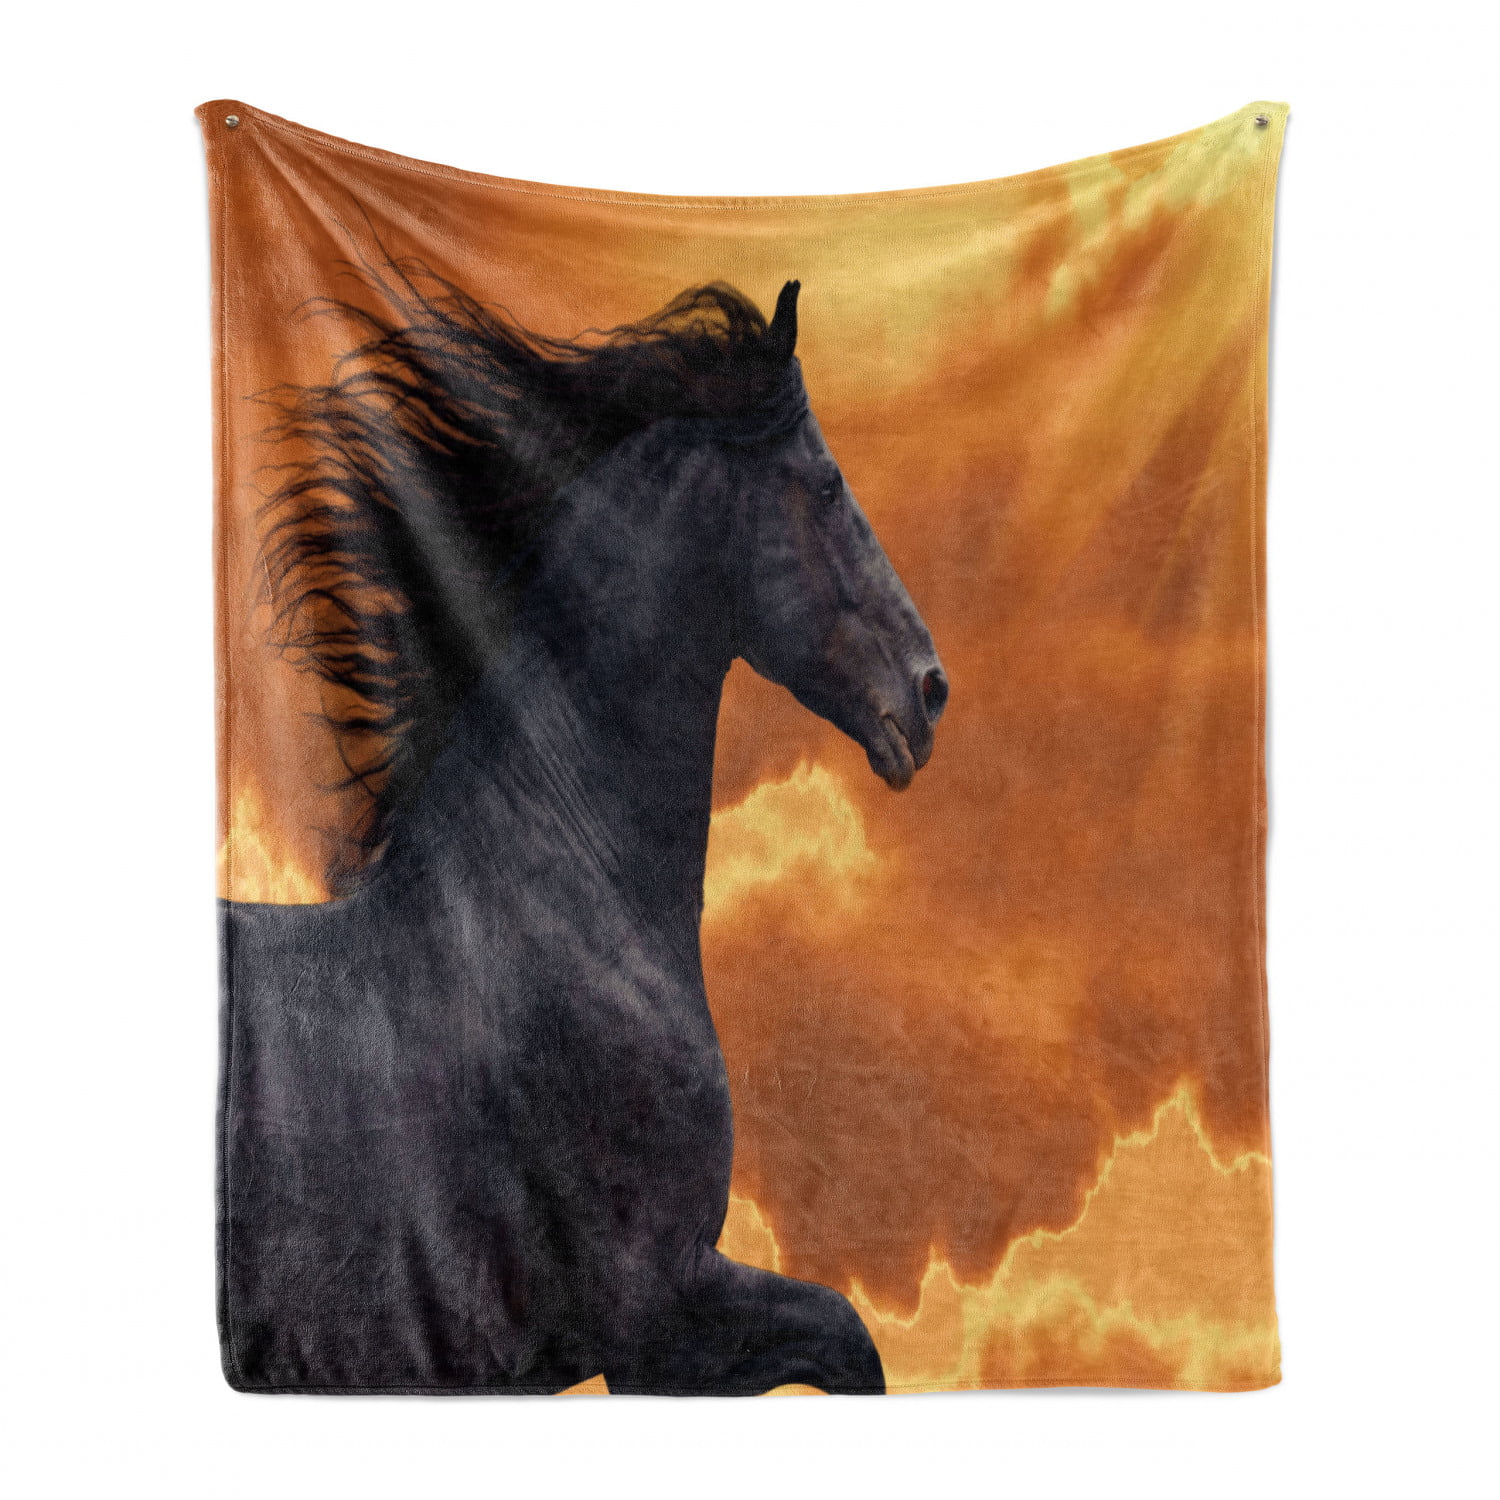 Multicolor Ambesonne Minnesota Soft Flannel Fleece Throw Blanket 2 Horses Grazing on a Green Meadow on Top of Rural Minnesota Hills Image Print 50 x 70 Cozy Plush for Indoor and Outdoor Use